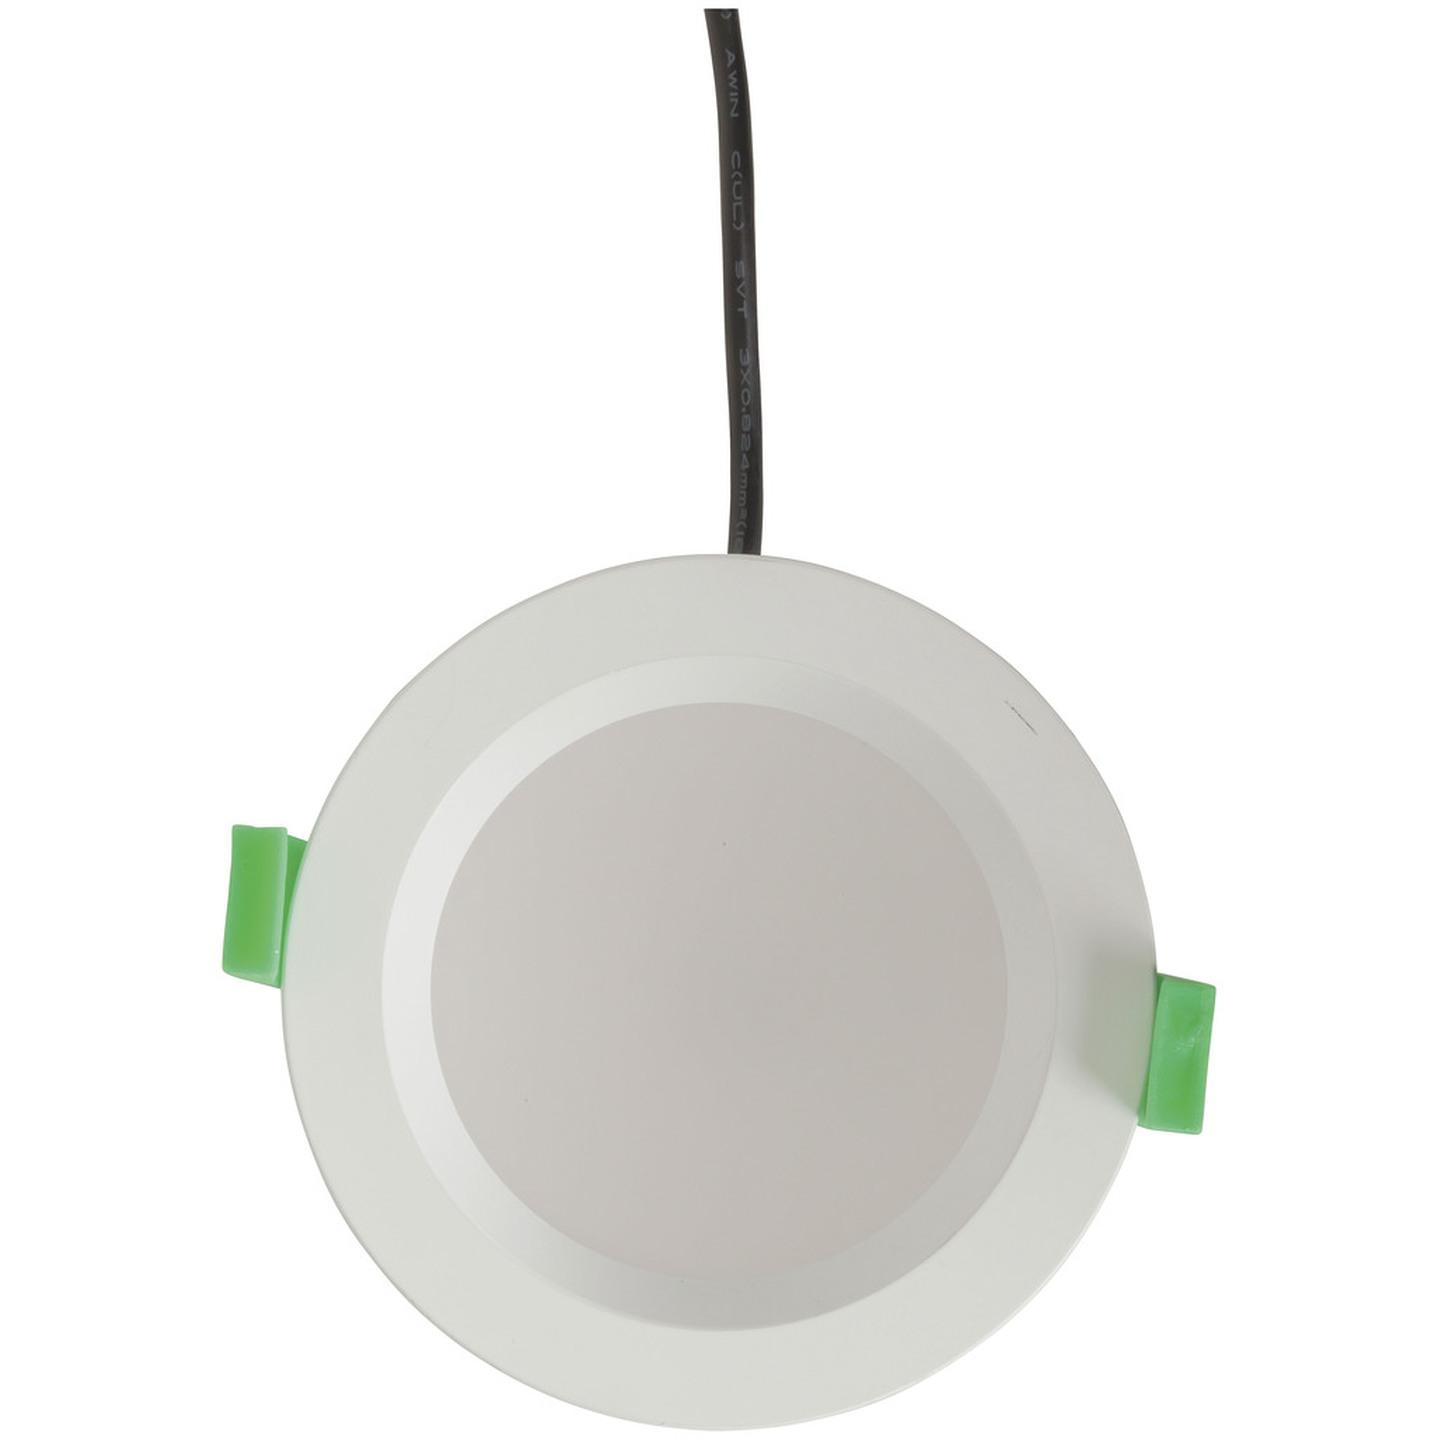 12W LED Recessed Downlight with Colour Temp & Brightness Control